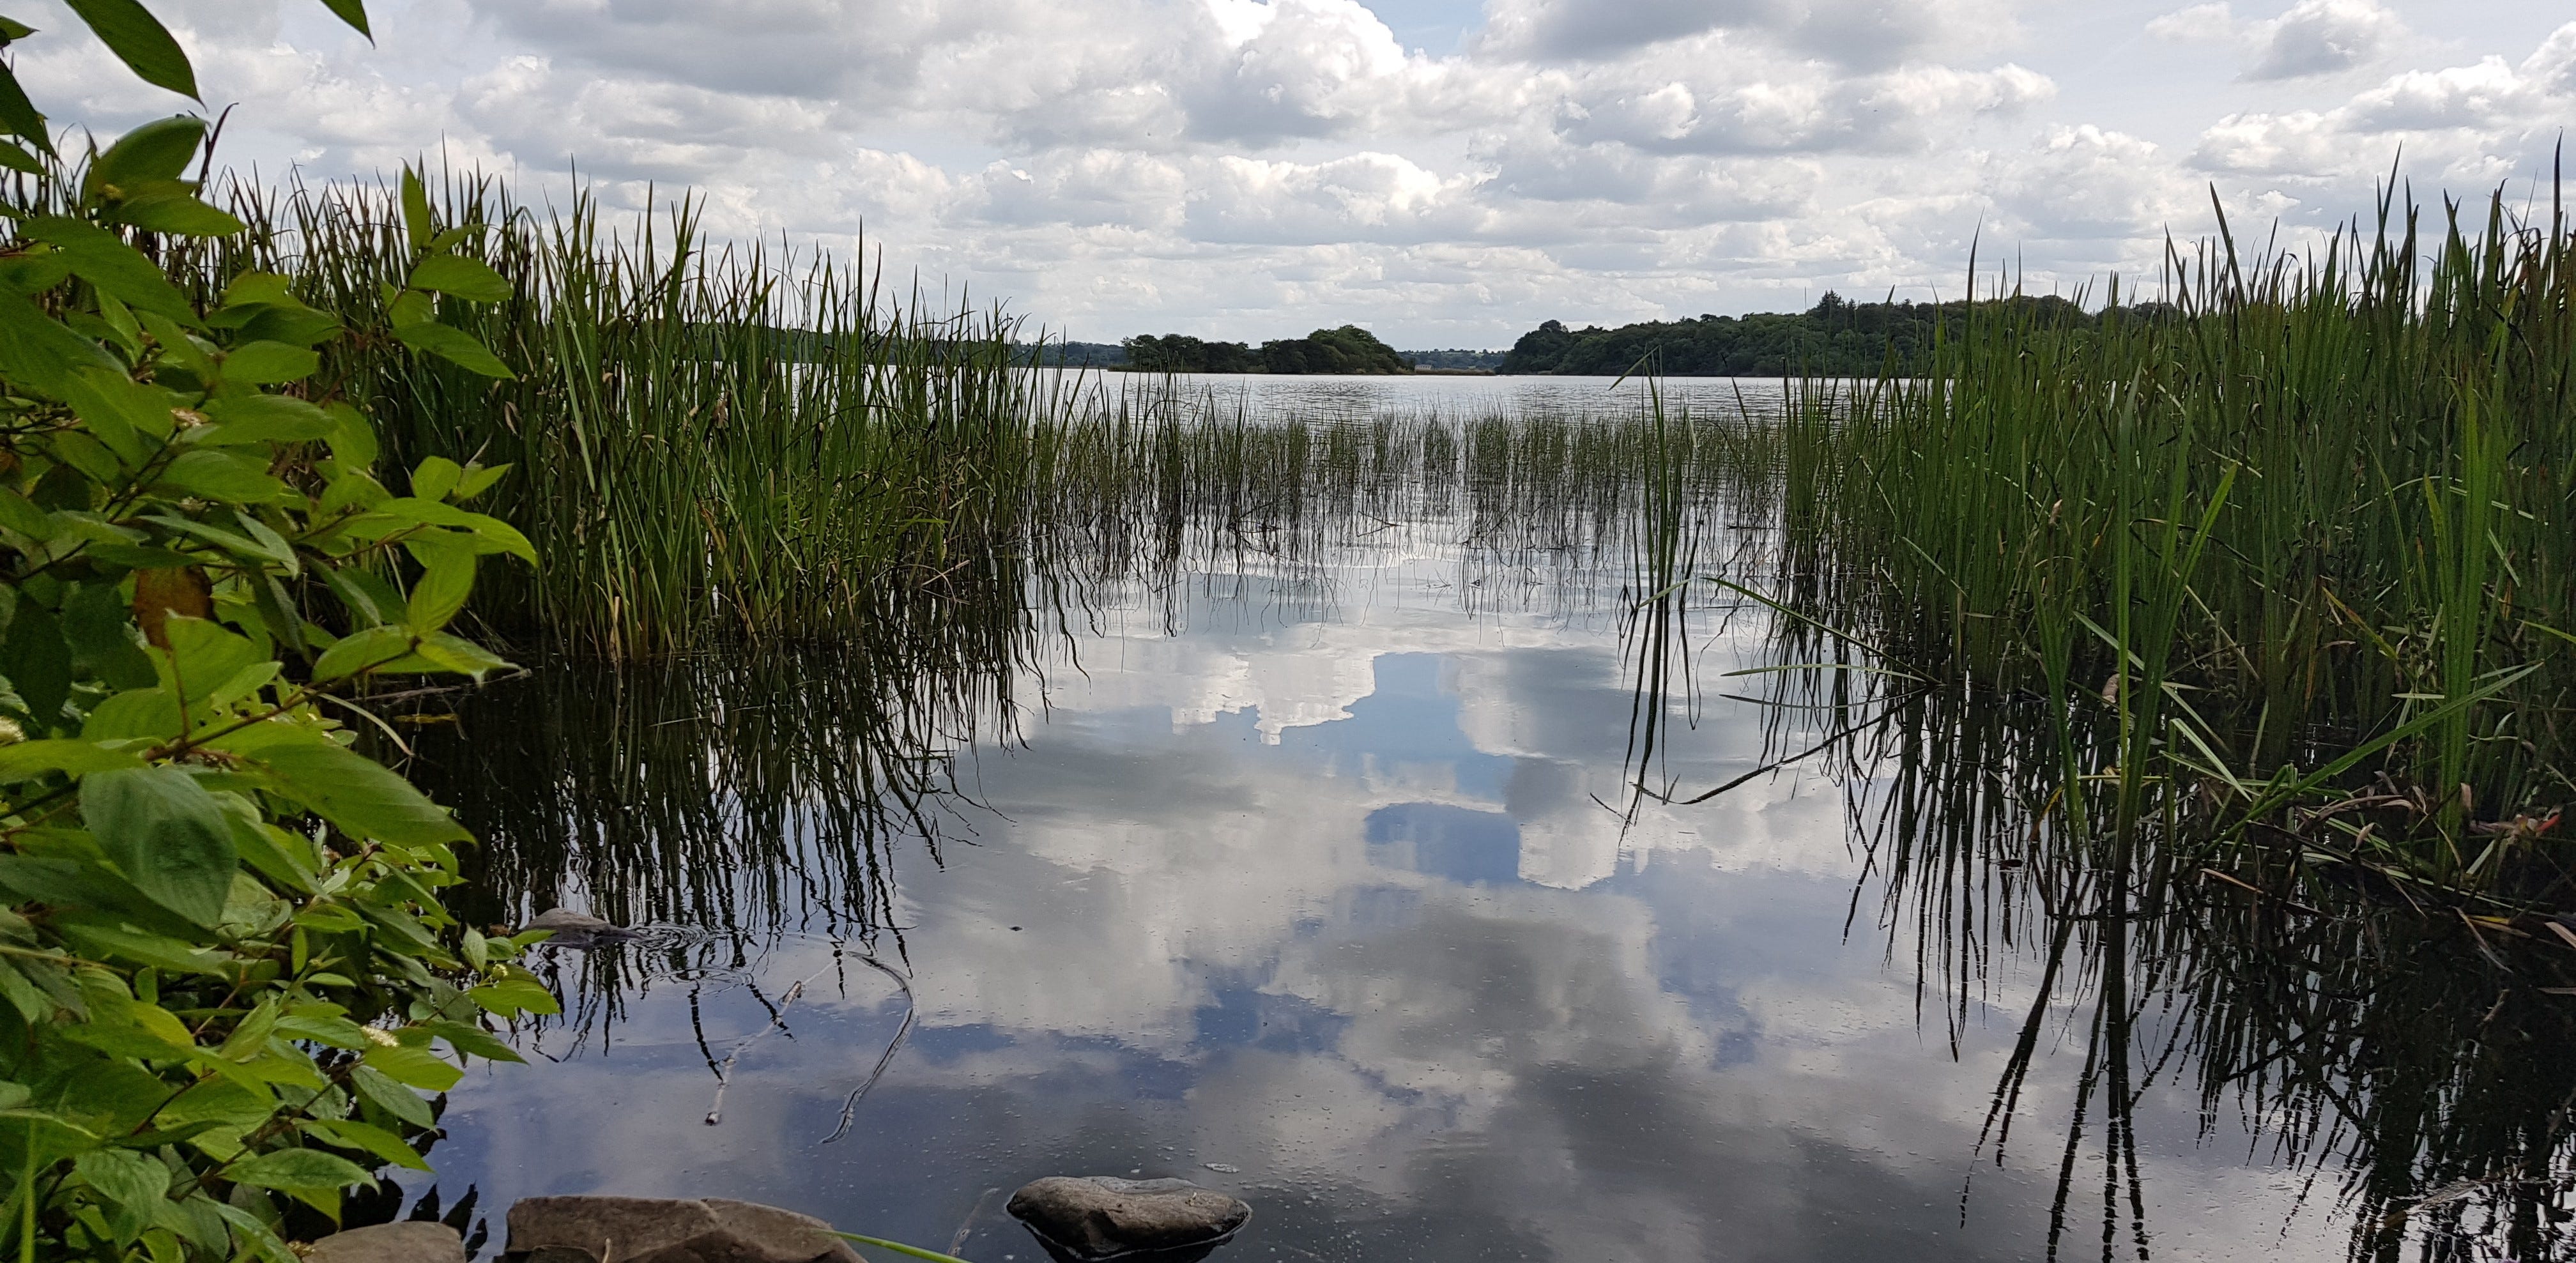 A calm still lough Ramor reflecting back a clouded sky, lake edged by tall green reeds and wooded shores visible in the distance.